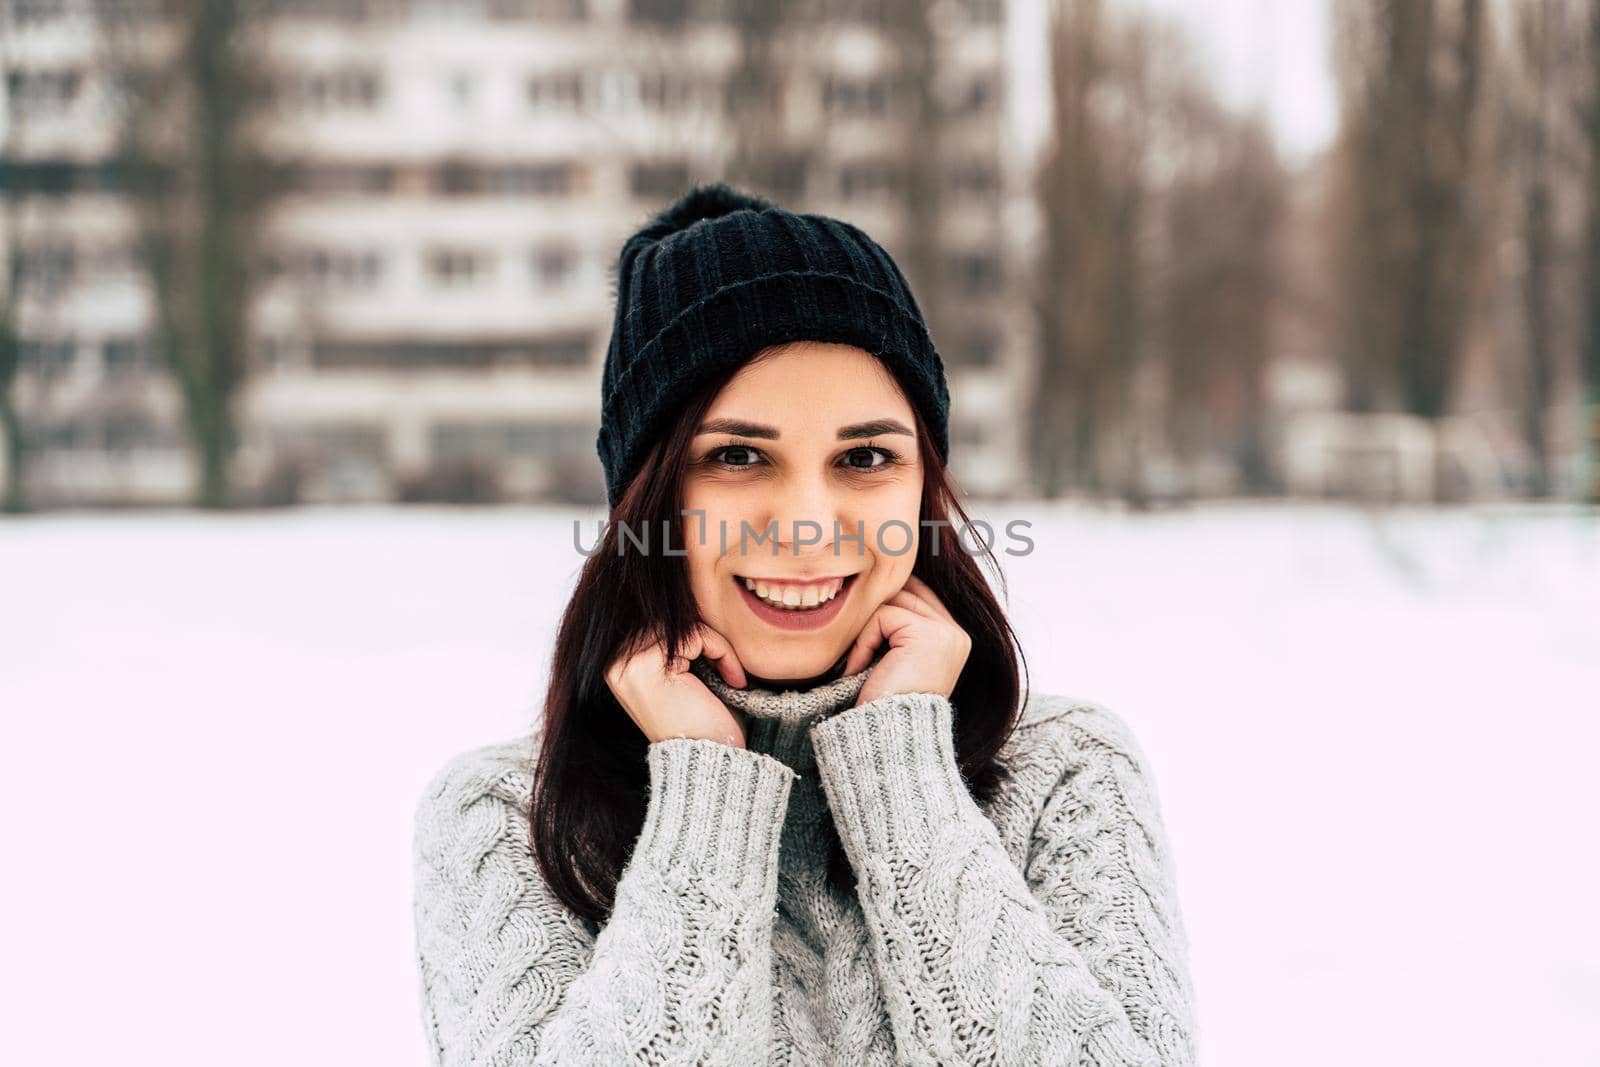 Young, beautiful woman with winter cap and gray sweater smiling and laughing while standing outside in winter by epidemiks